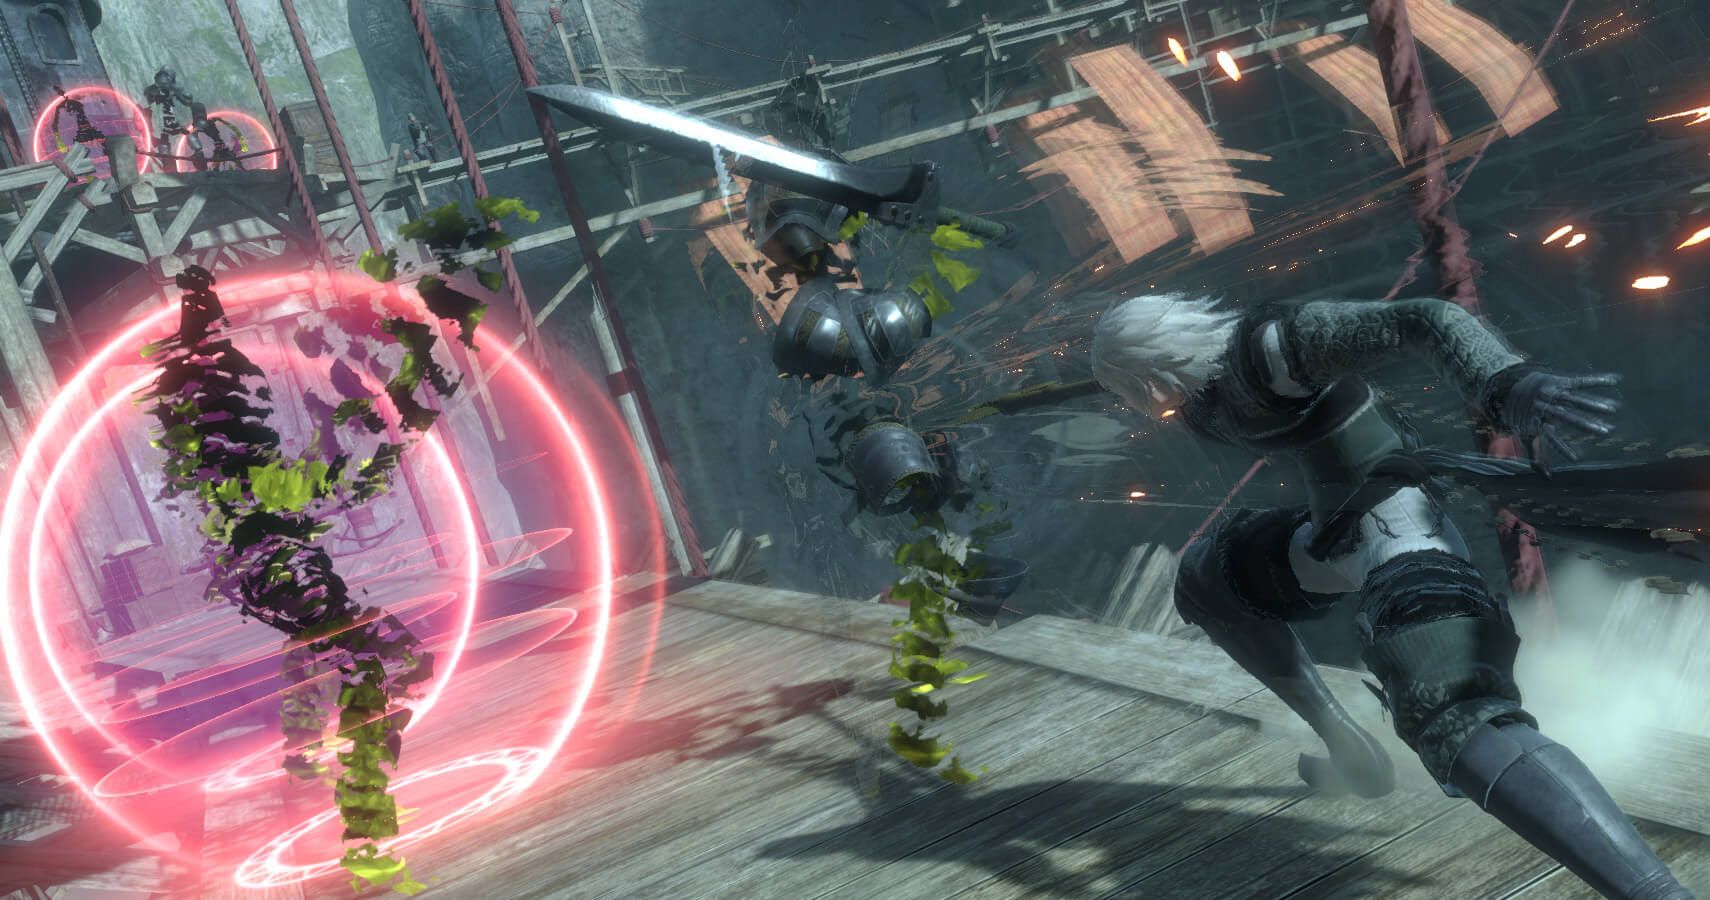 Brother Nier battling shades in Nier Replicant.